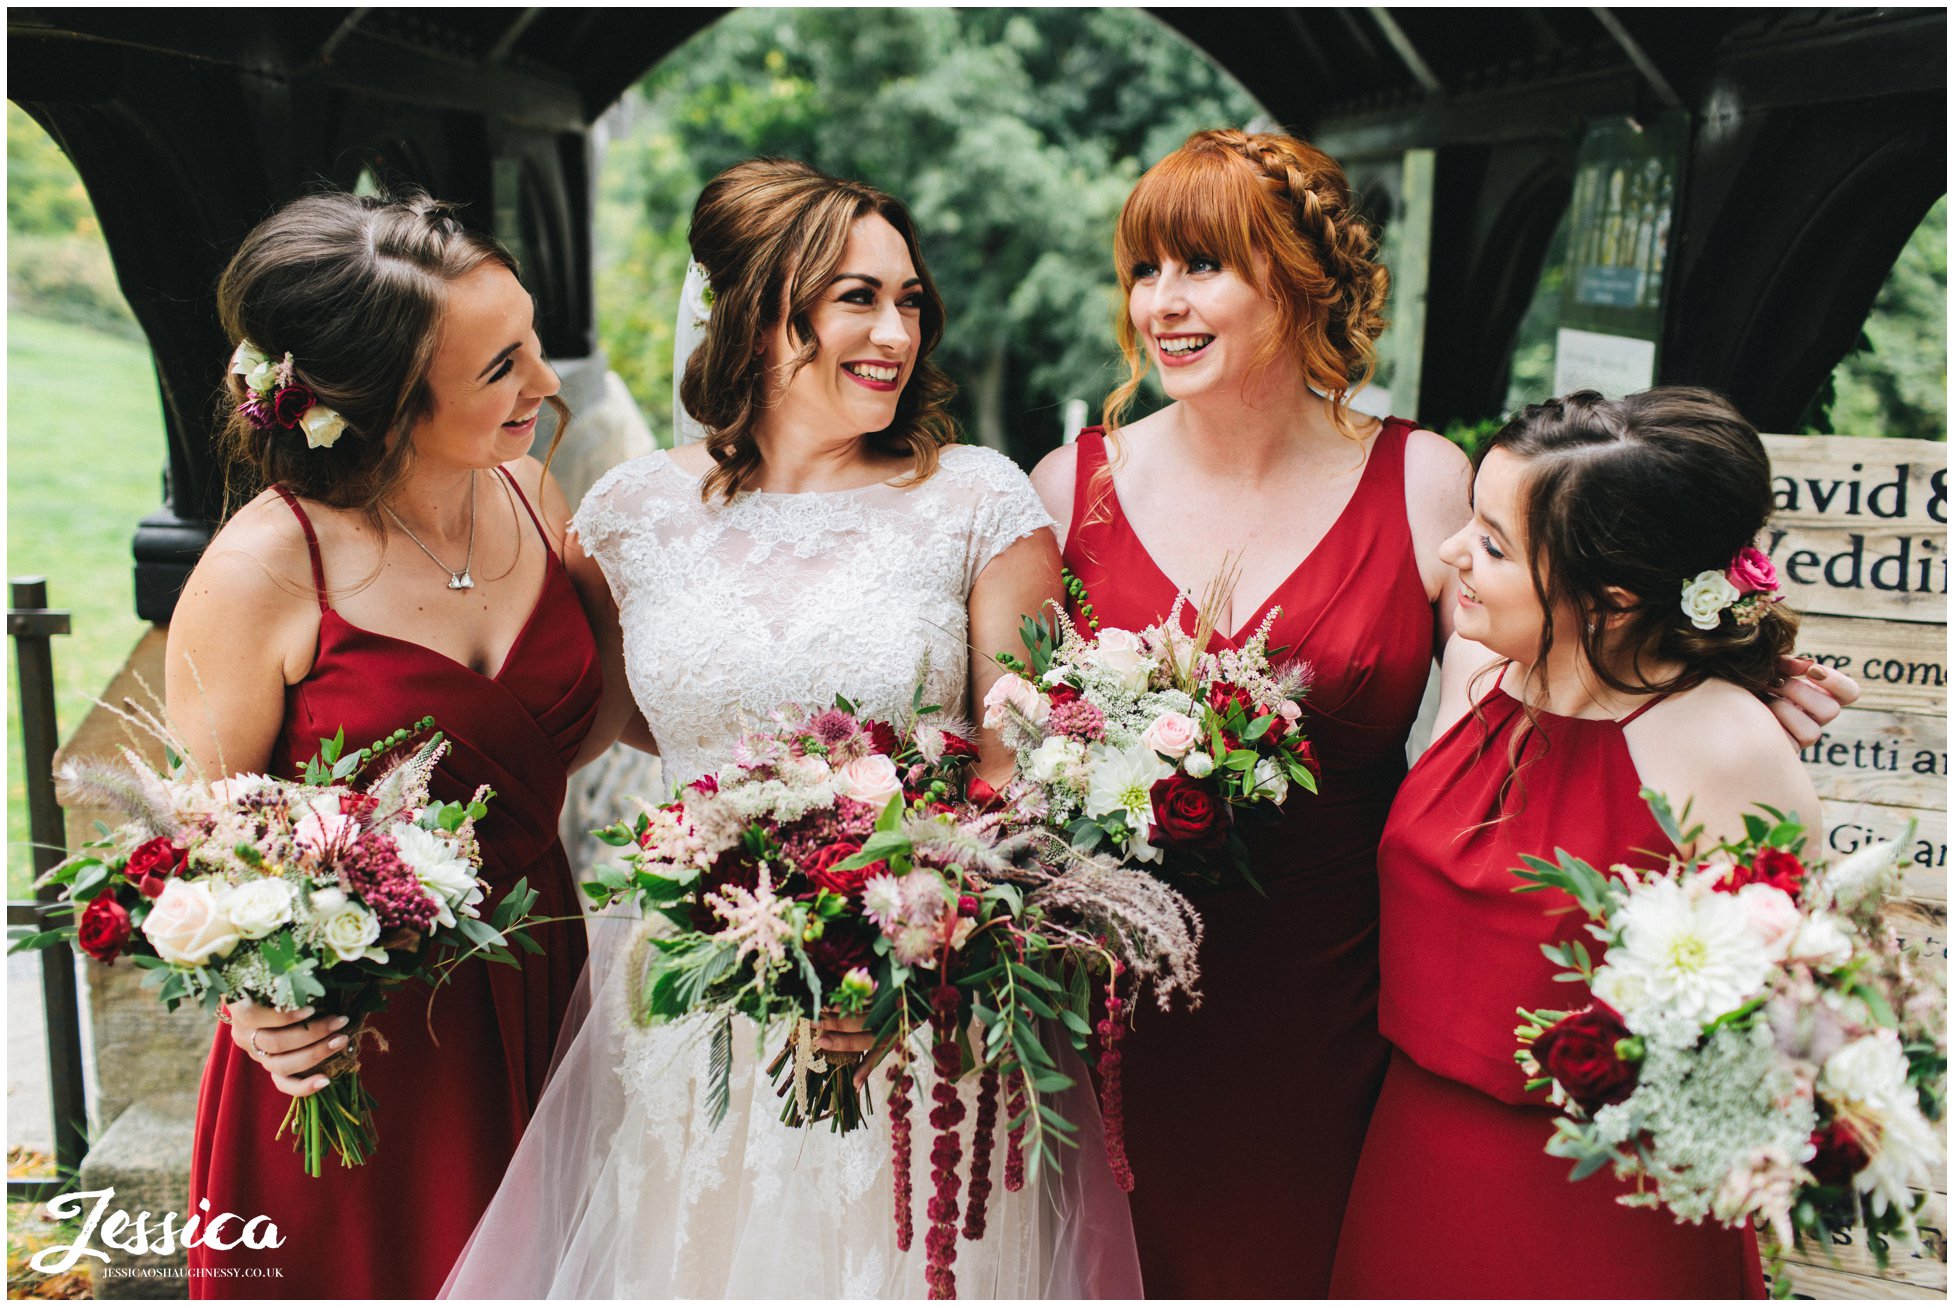 the bride laughs with her bridesmaids before the ceremony starts